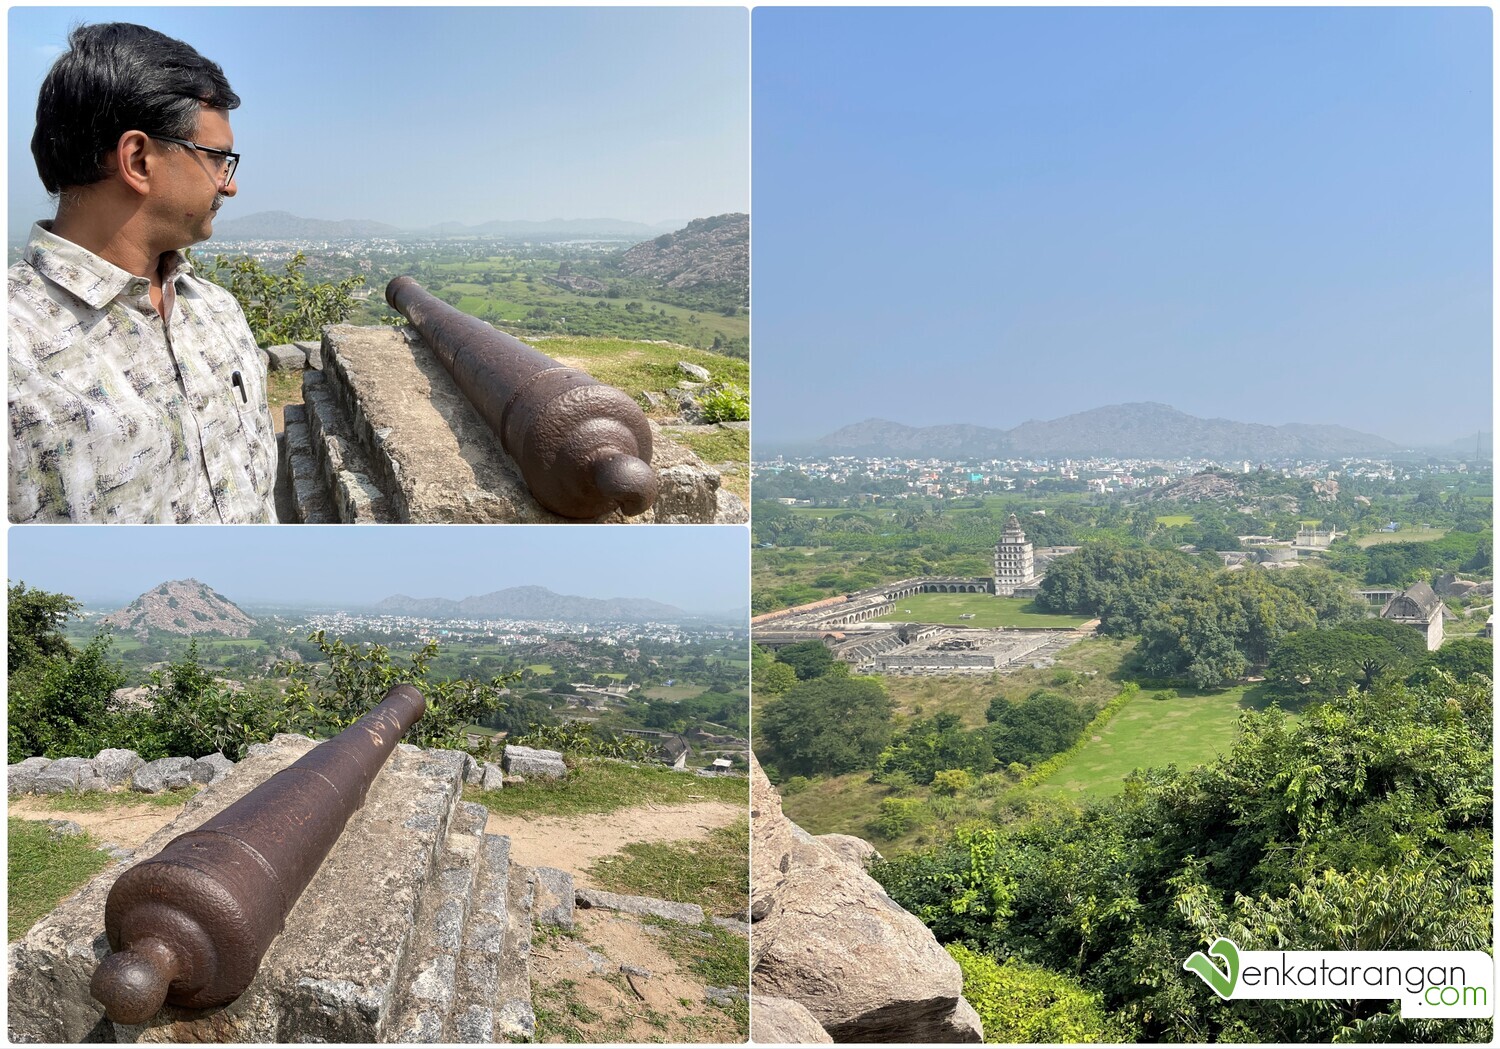 A large cannon - Rajagiri fort, Gingee 